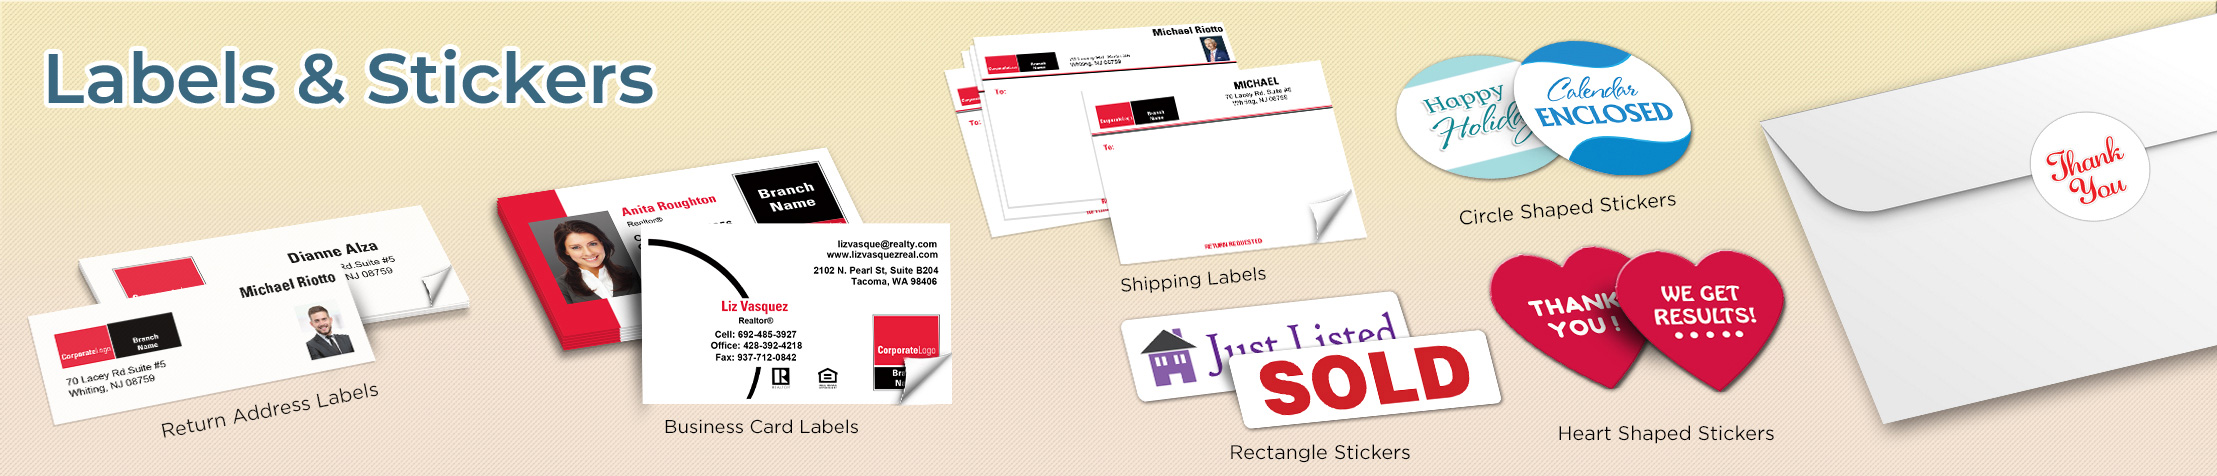 Real Living Real Estate Labels and Stickers - Real Living Real Estate business card labels, return address labels, shipping labels, and assorted stickers | BestPrintBuy.com